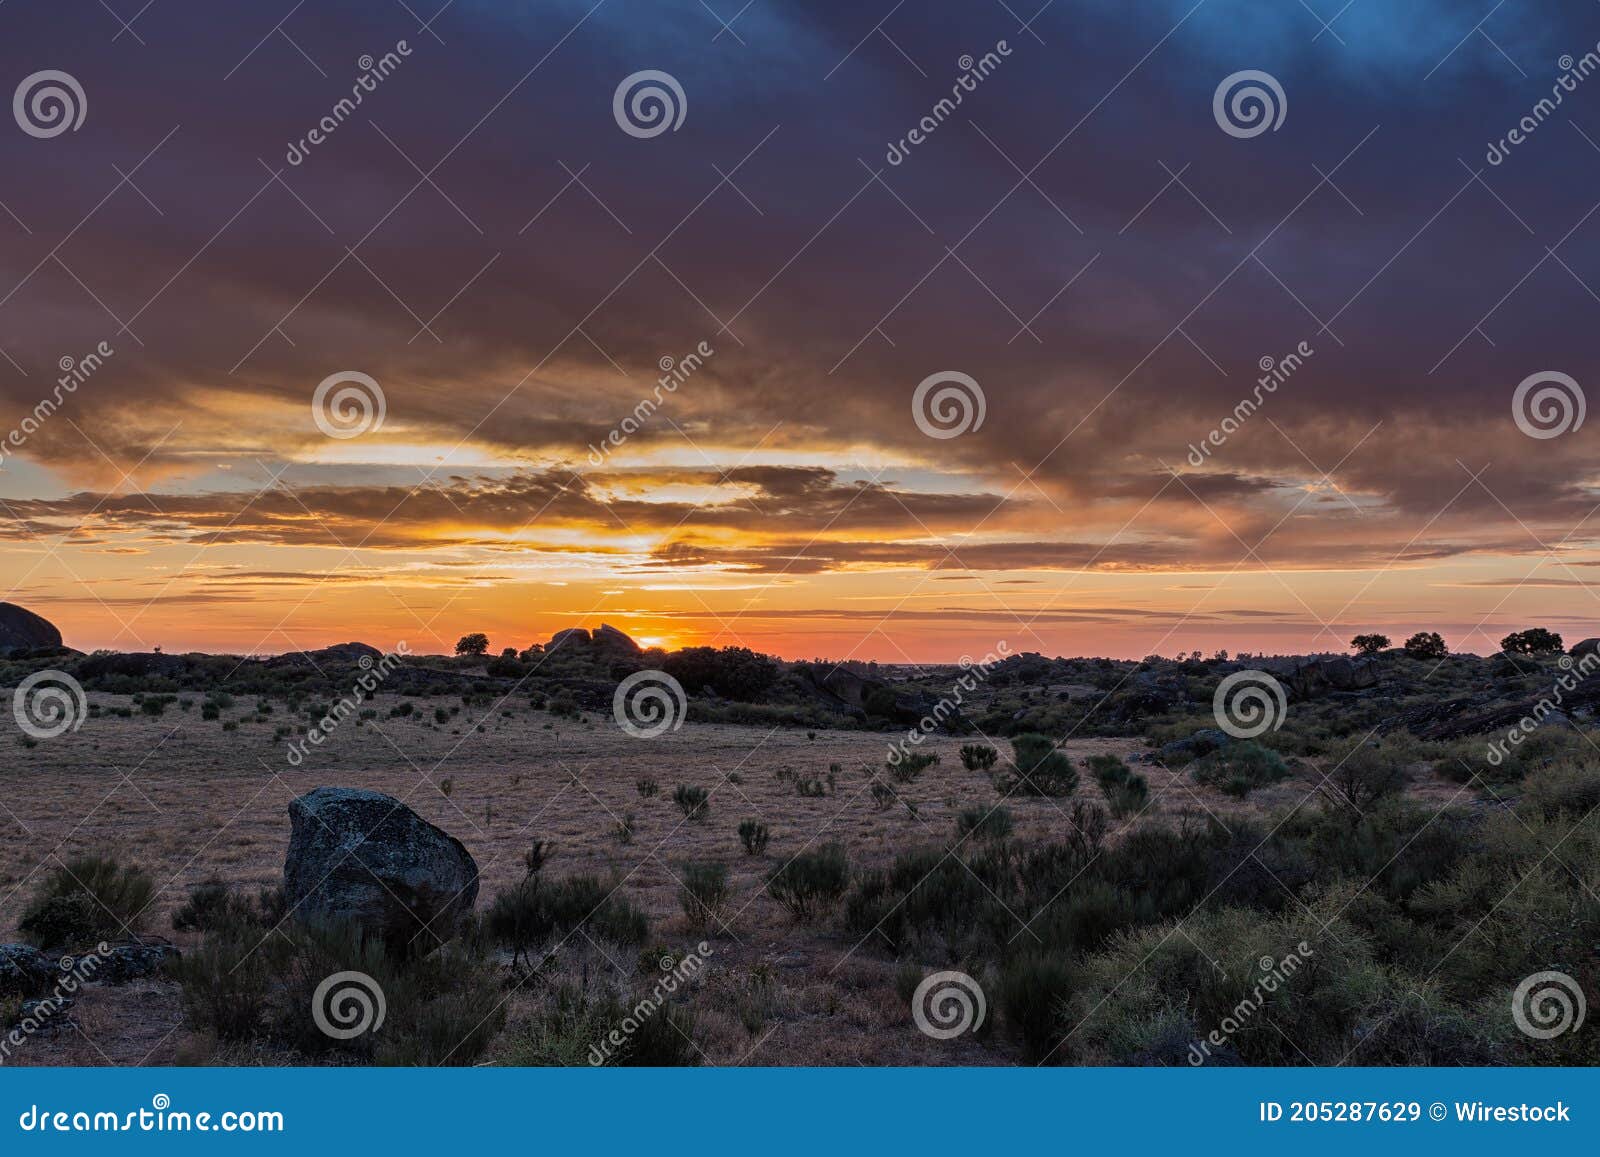 beautiful sunset over the natural area of marruecos, spain